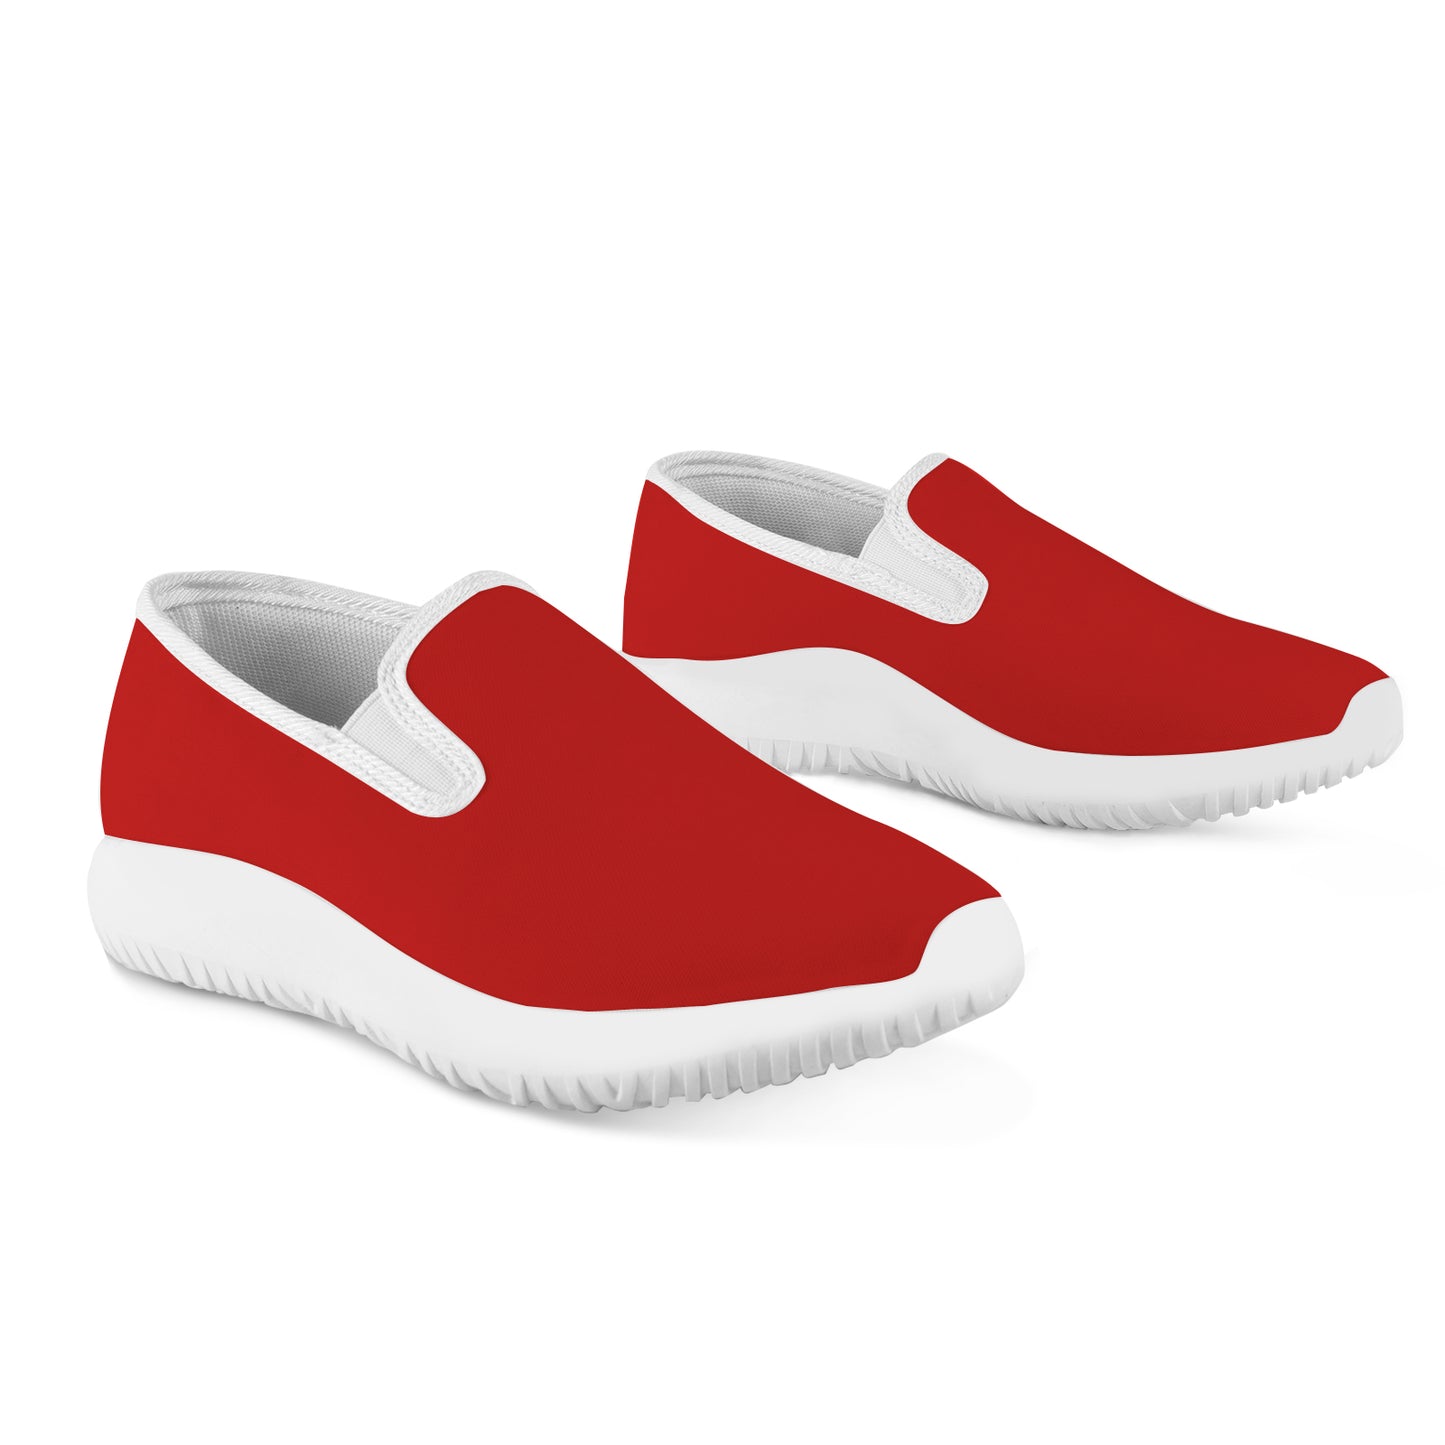 Women's Slip-on Sneakers- Classic Red